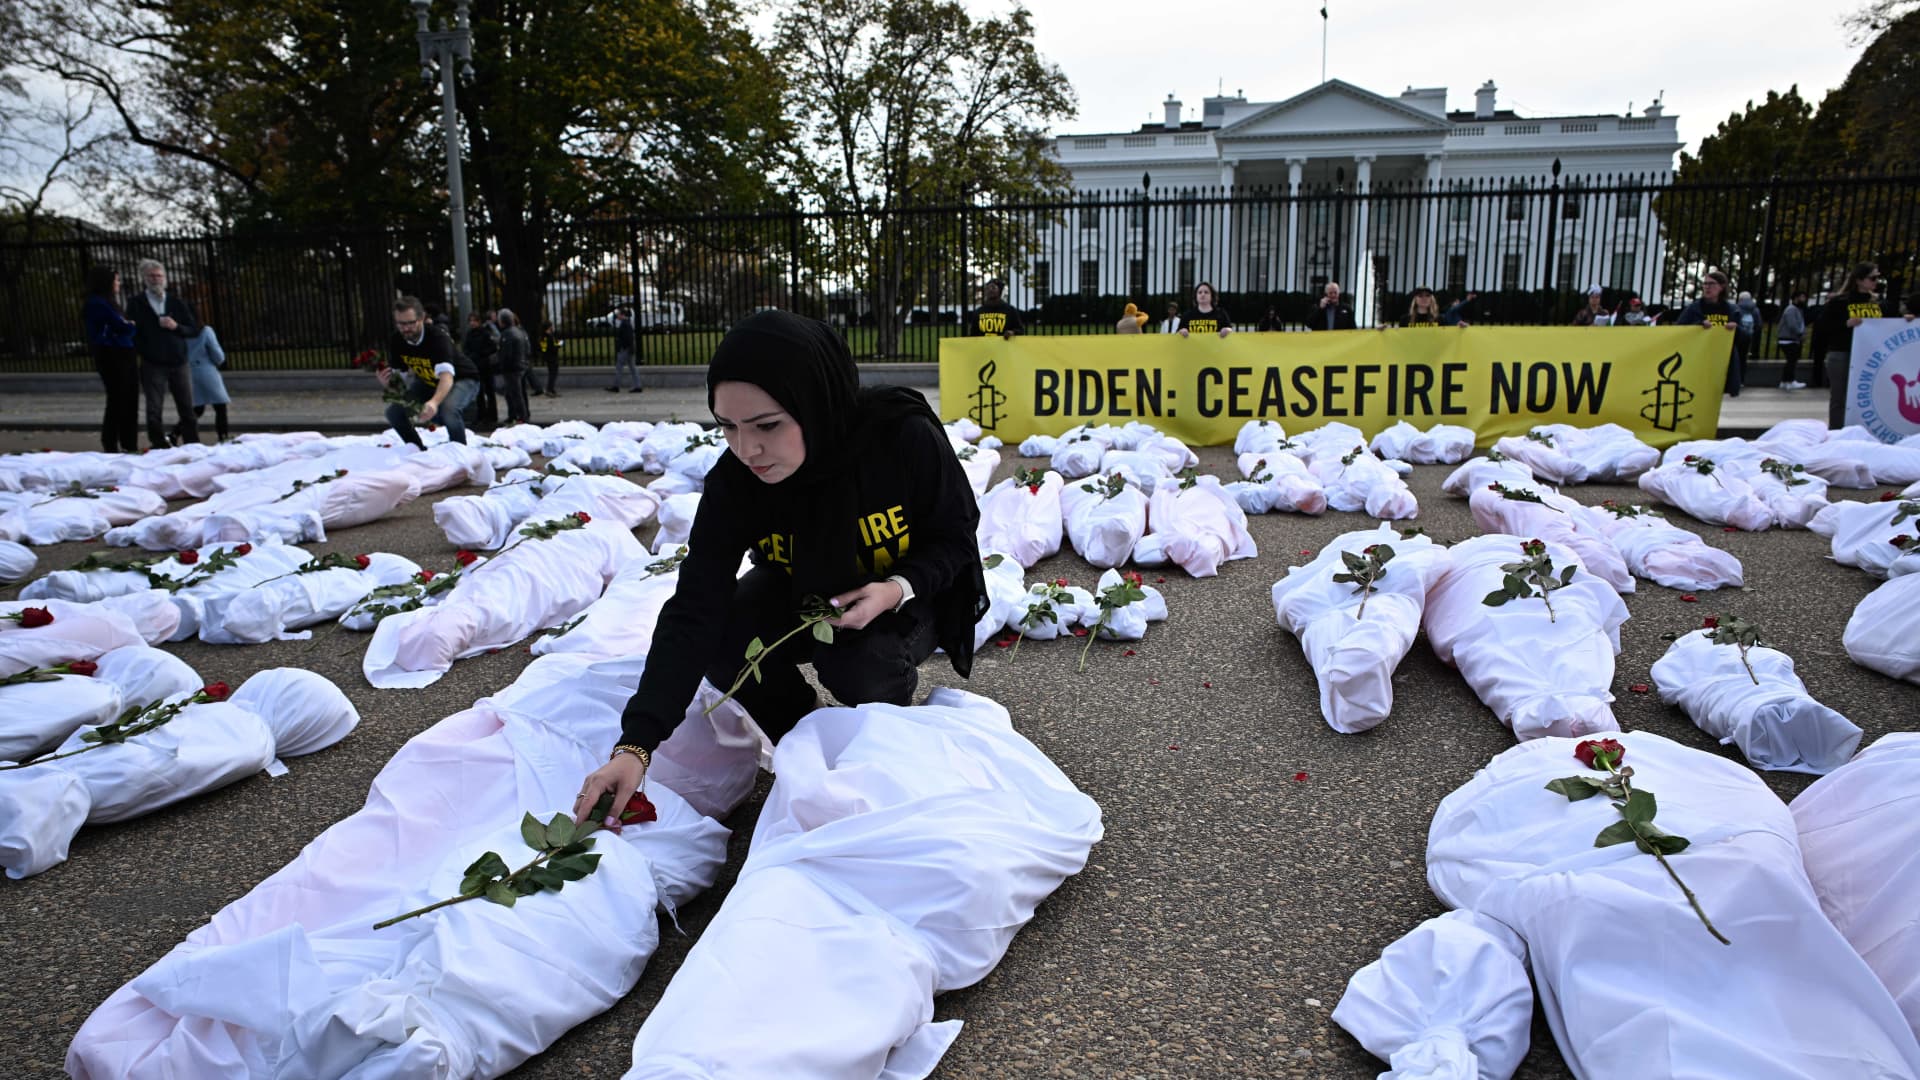 A demonstrator places flowers on white-shrouded body bags representing victims in the Israel-Hamas conflict, in front of the White House in Washington, DC, on November 15, 2023.